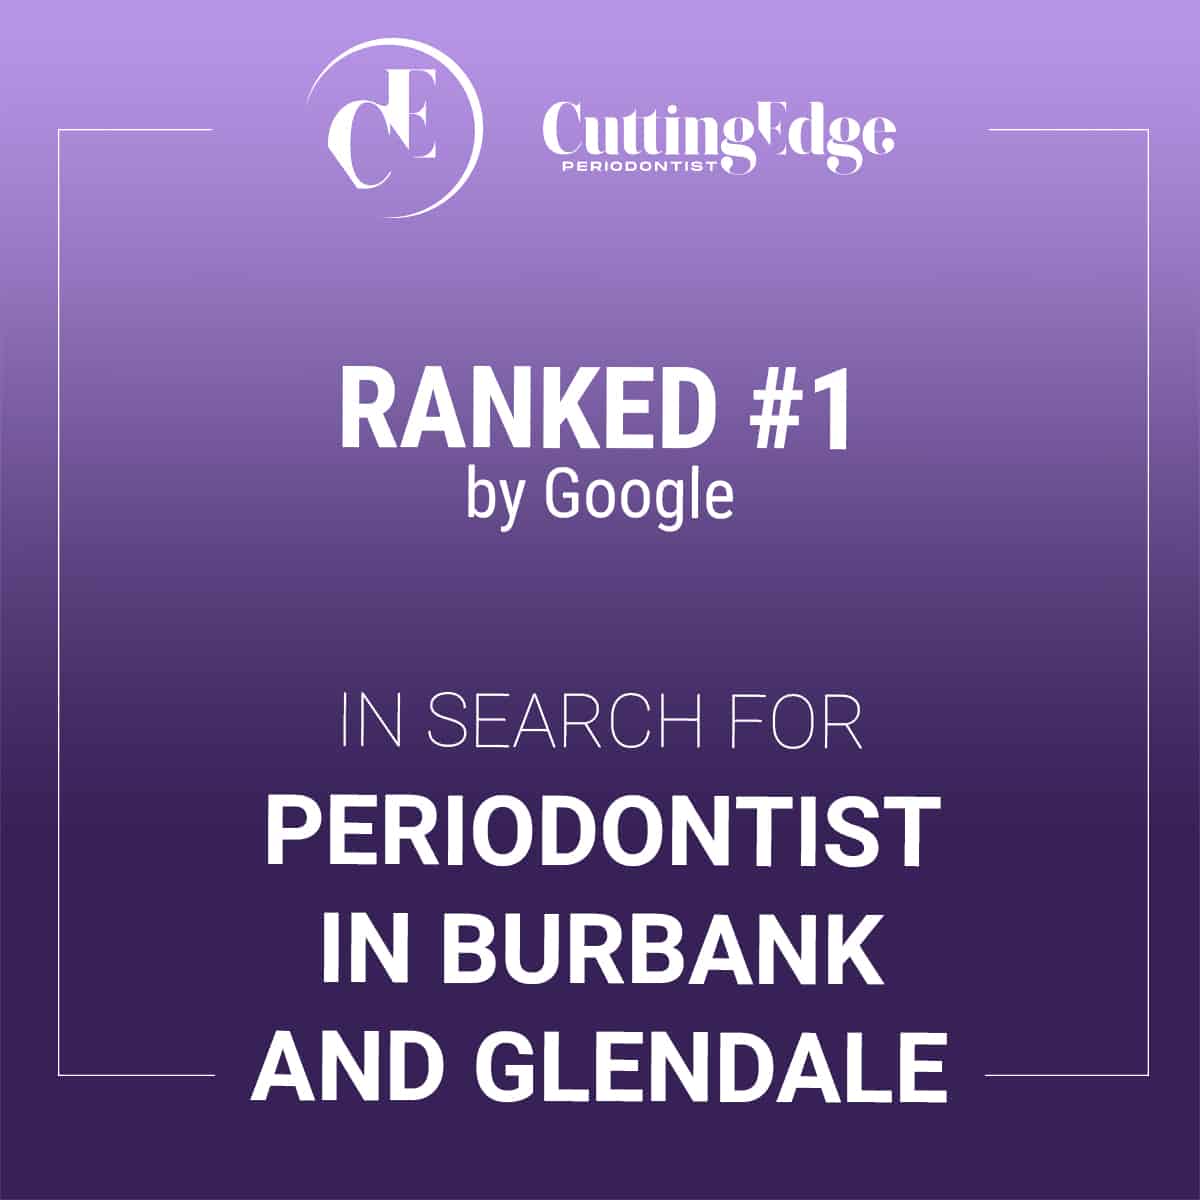 #1 Ranked in Google Search for Periodontist in Burbank and Glendale, CA